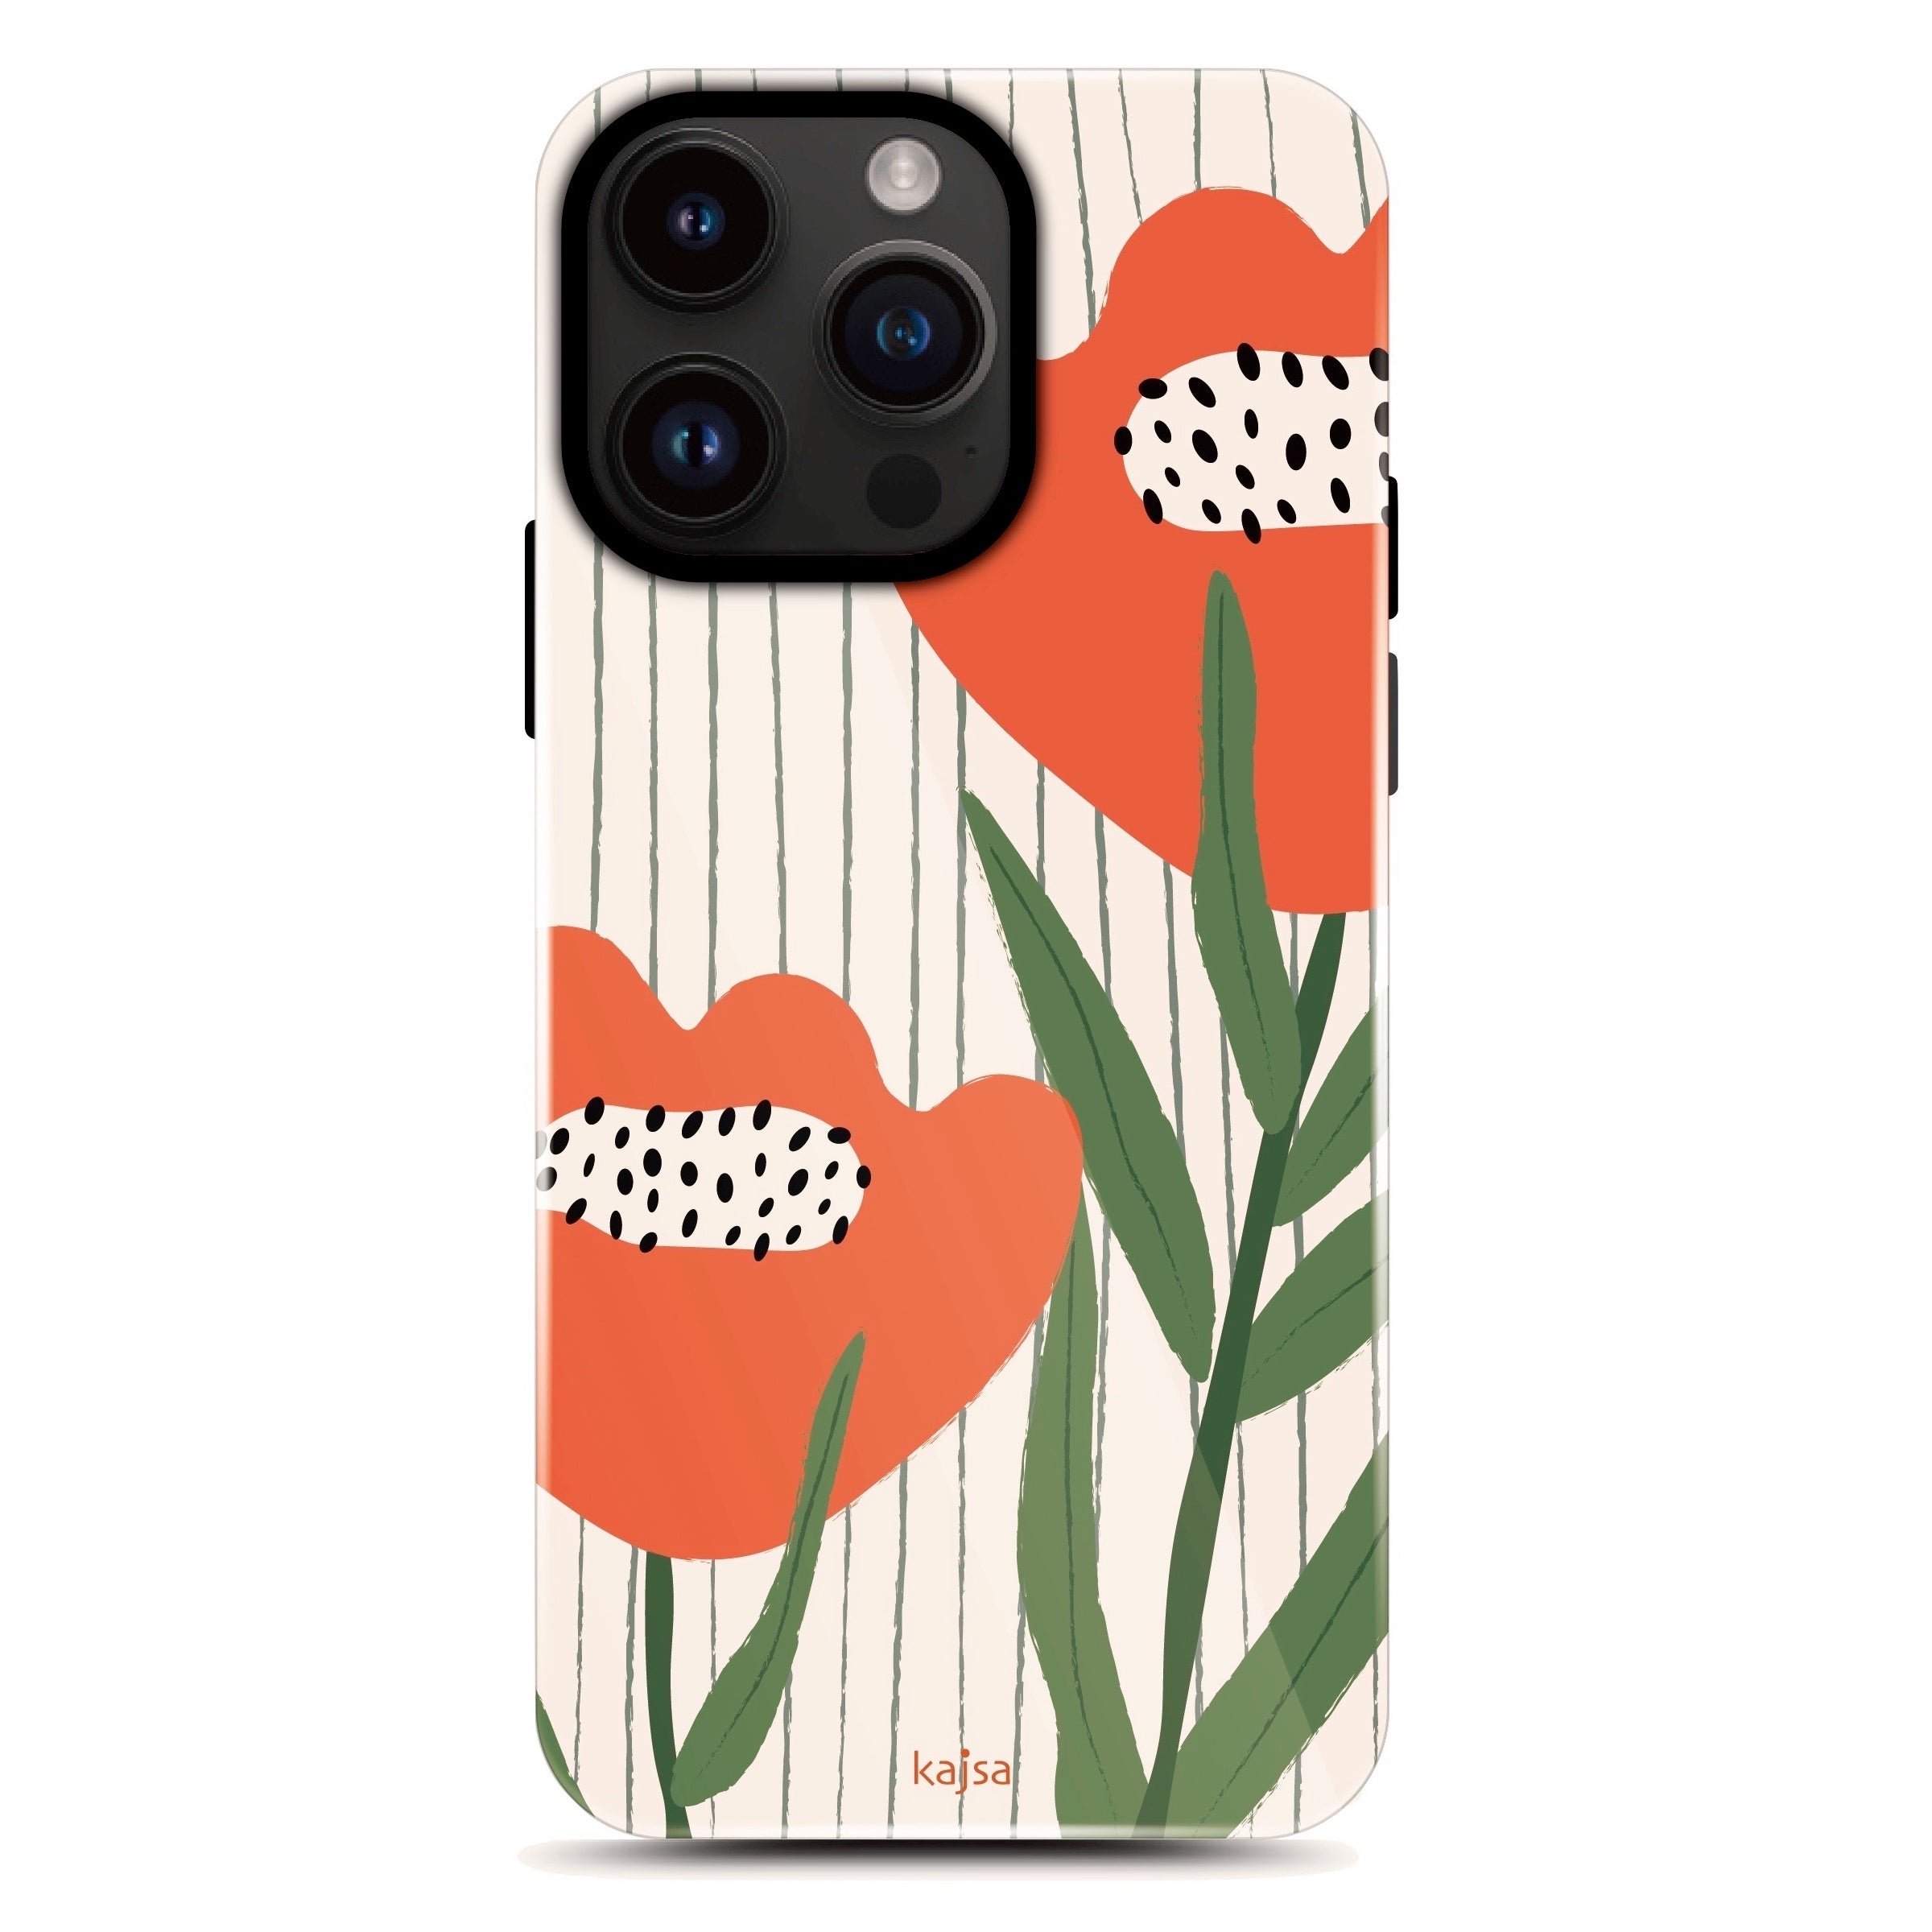 Floral Collection - Garden Back Case for iPhone 14 (G2)-Phone Case- phone case - phone cases- phone cover- iphone cover- iphone case- iphone cases- leather case- leather cases- DIYCASE - custom case - leather cover - hand strap case - croco pattern case - snake pattern case - carbon fiber phone case - phone case brand - unique phone case - high quality - phone case brand - protective case - buy phone case hong kong - online buy phone case - iphone‎手機殼 - 客製化手機殼 - samsung ‎手機殼 - 香港手機殼 - 買電話殼